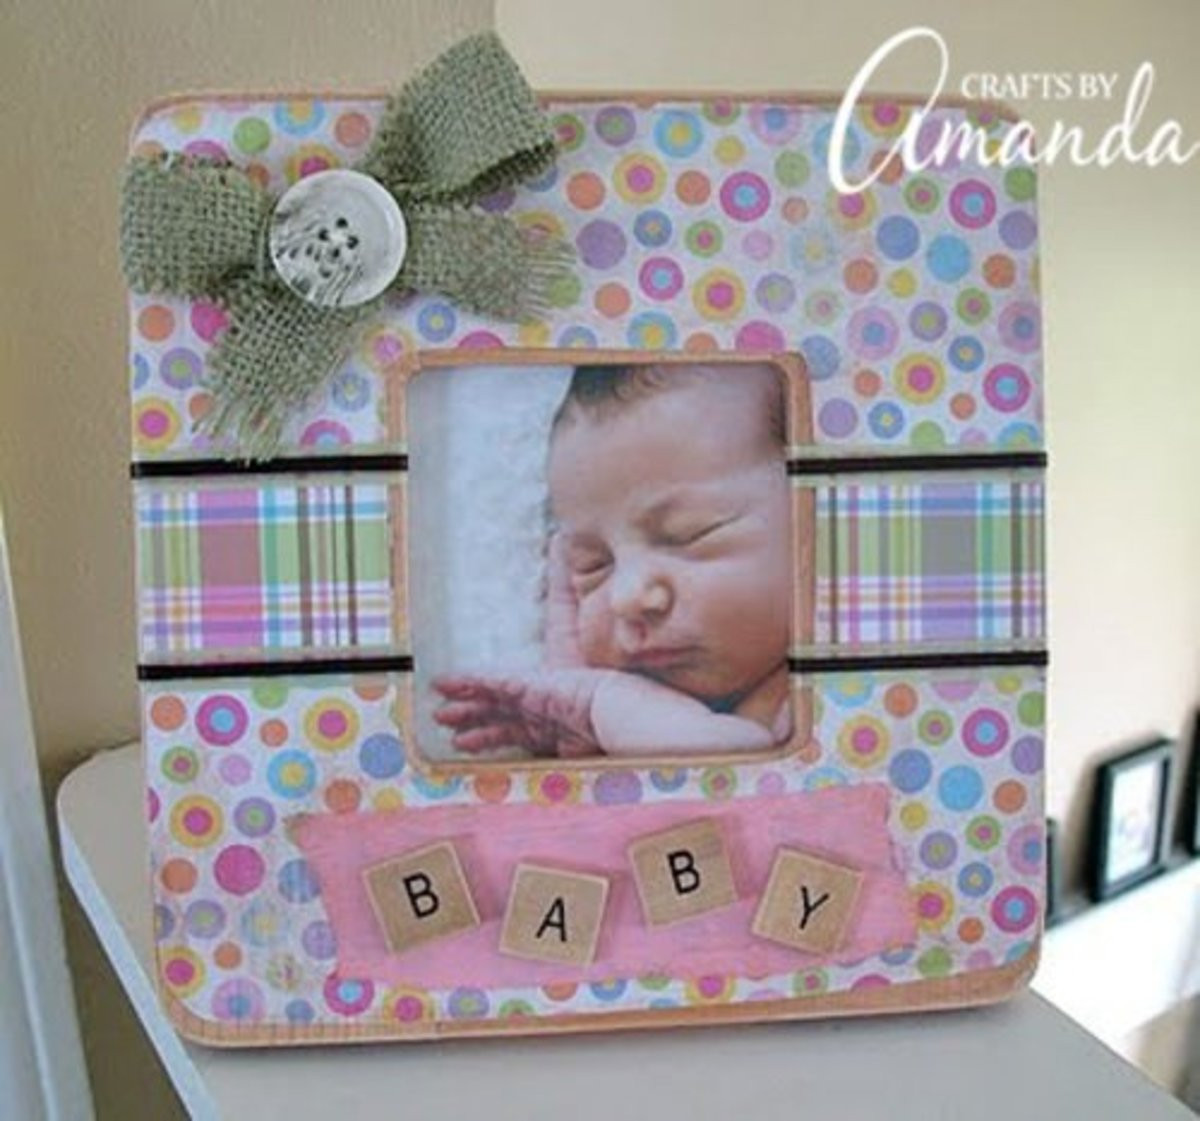 New Baby Crafts
 50 Darling Homemade Gift Ideas to Make for a New Mom